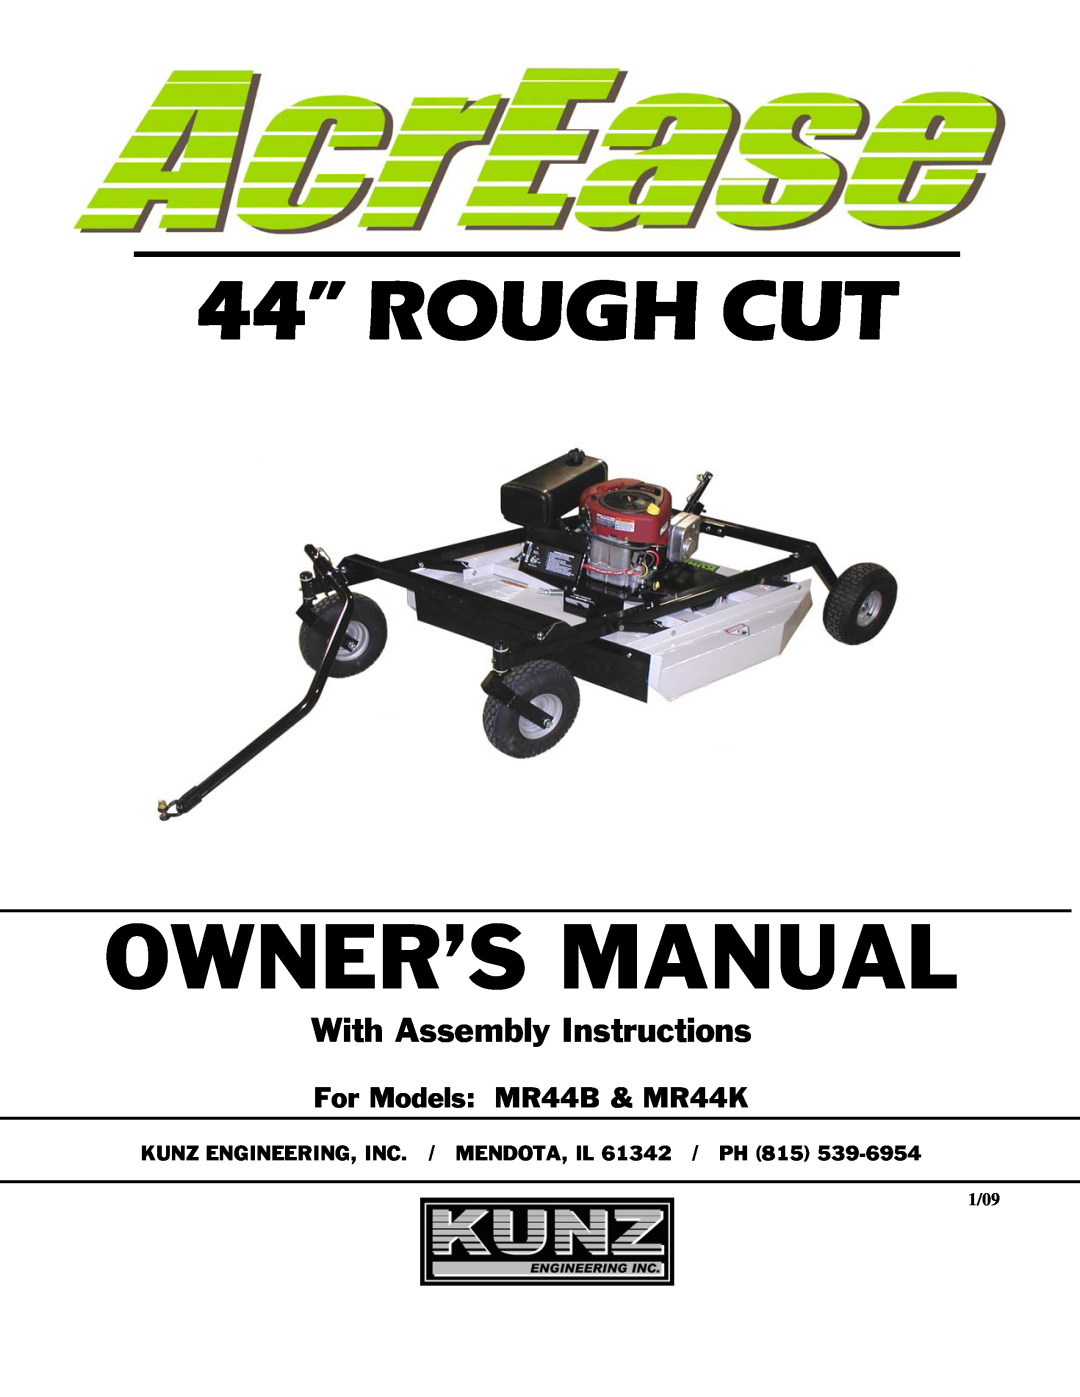 Kunz owner manual With Assembly Instructions, For Models MR44B & MR44K, KUNZ ENGINEERING, INC. / MENDOTA, IL 61342 / PH 